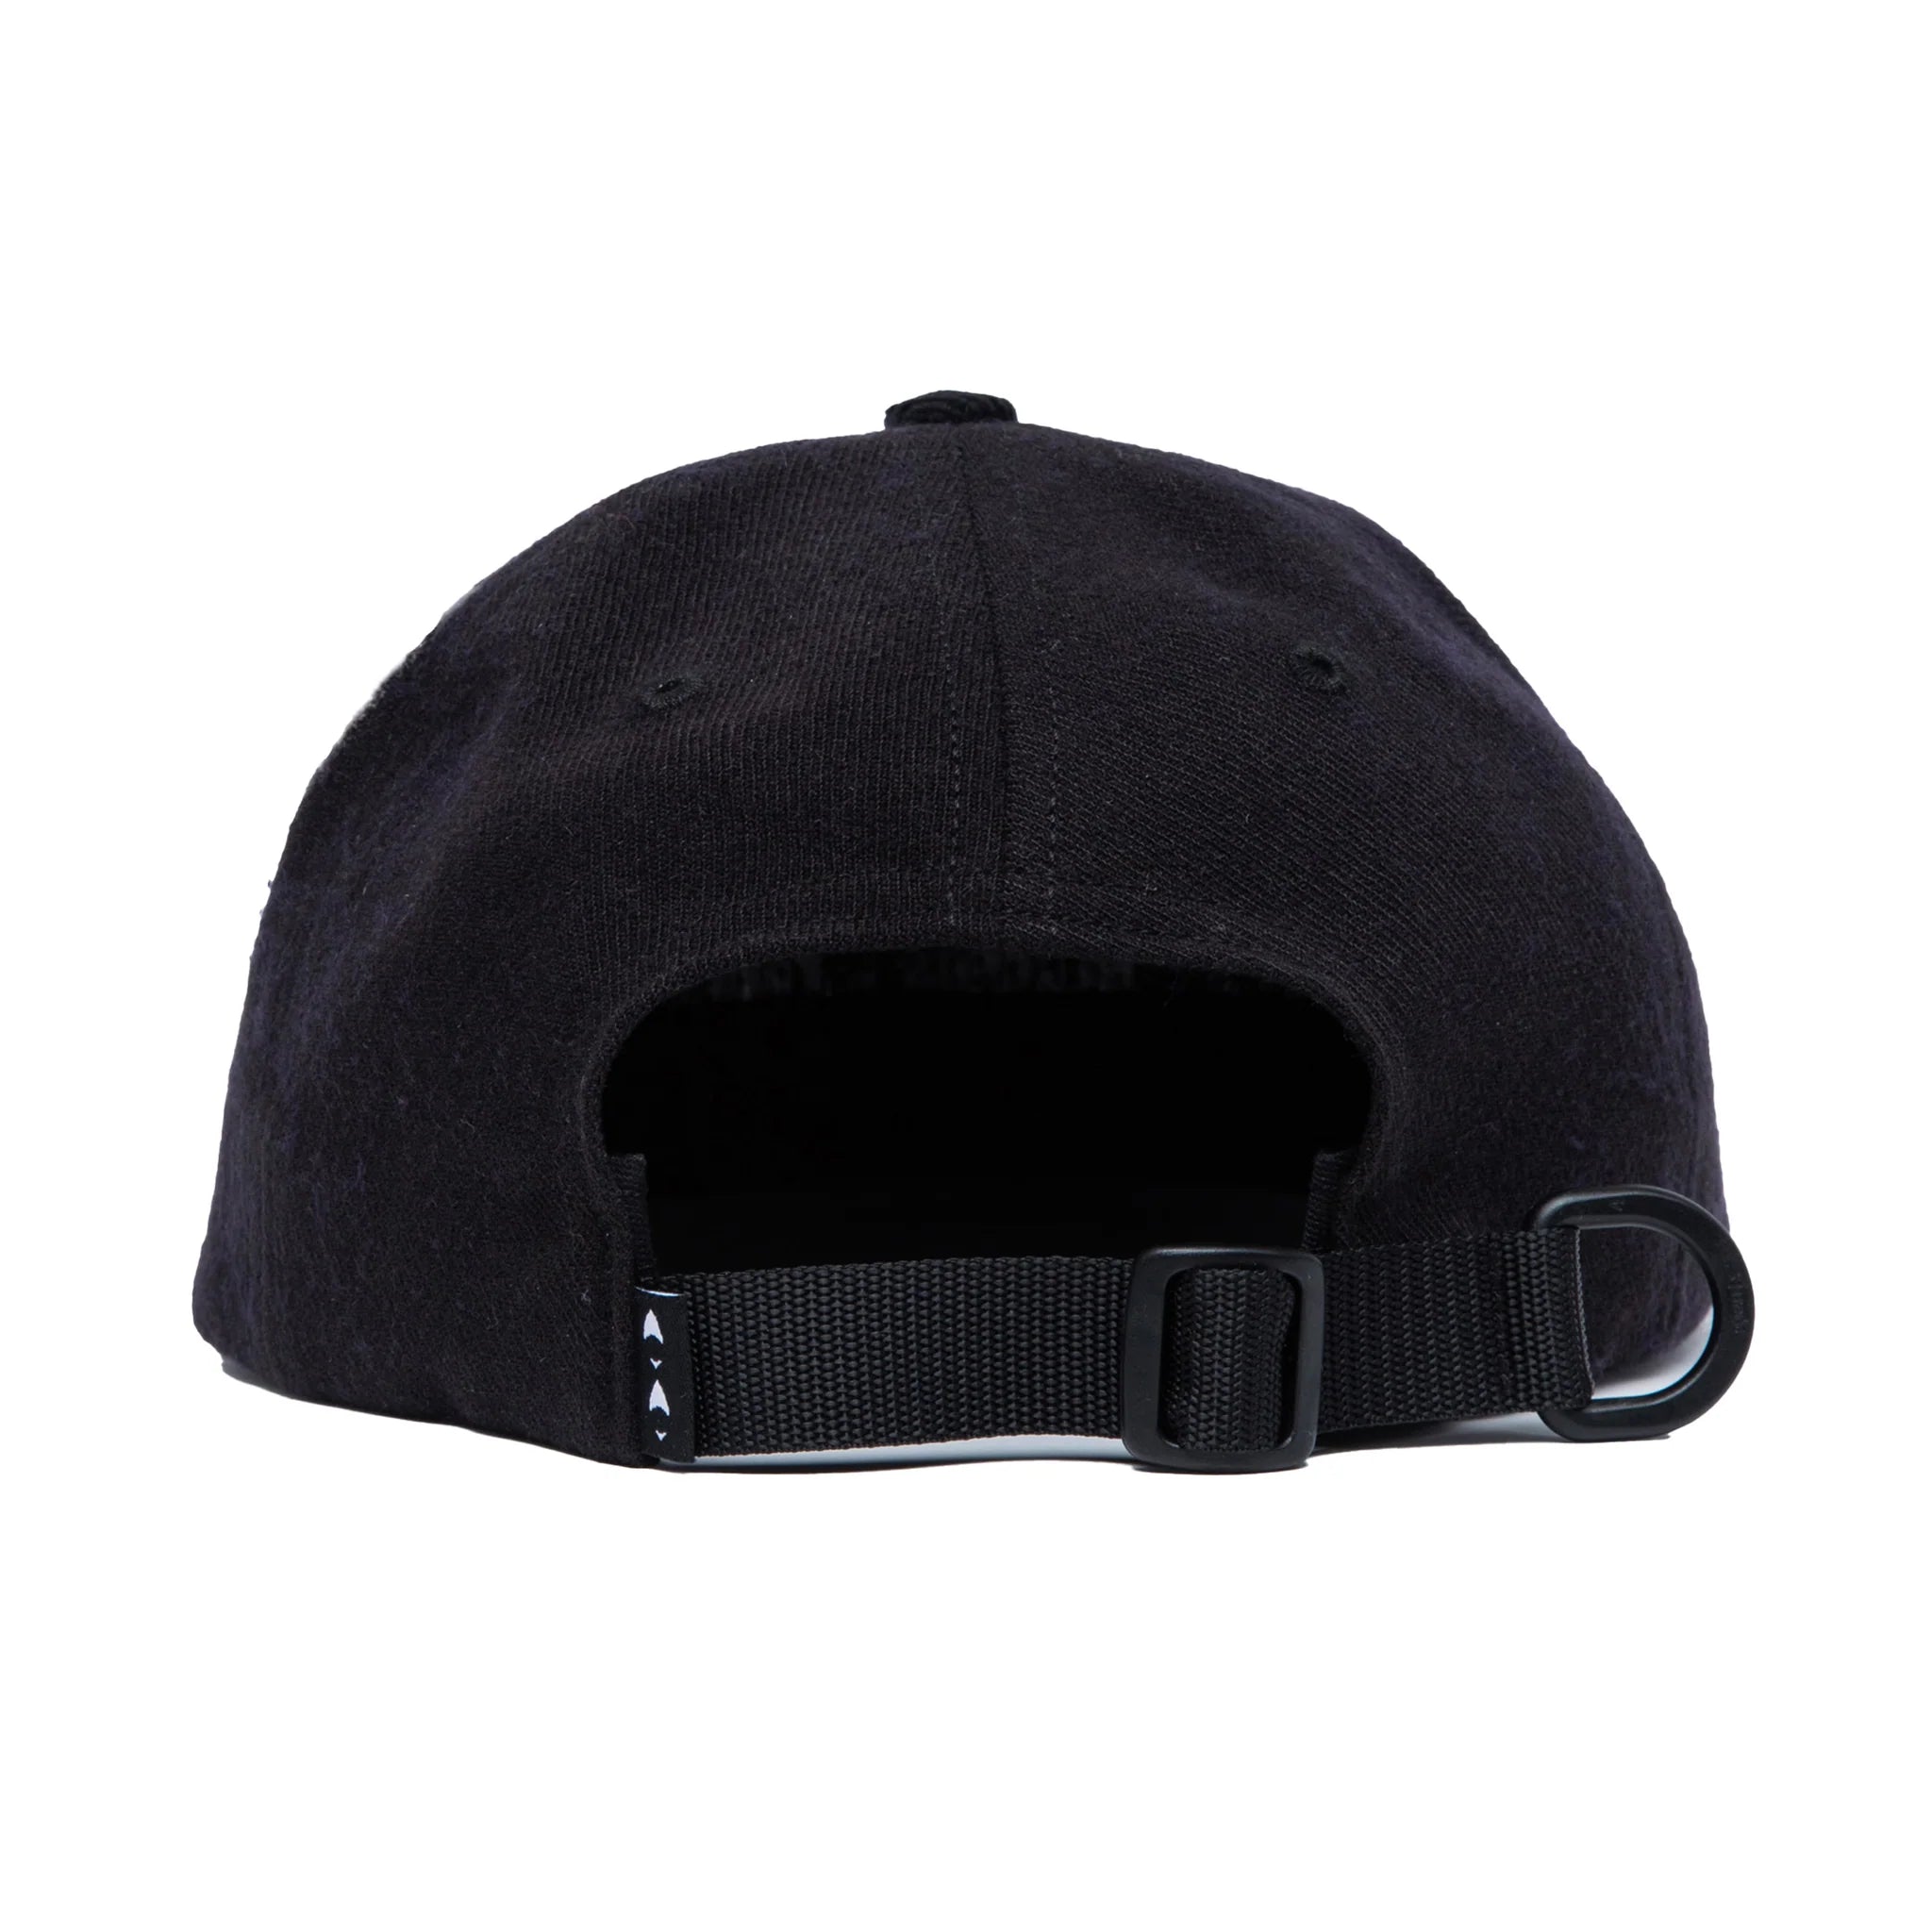 RECORDS & TAPES HAT｜BLACK